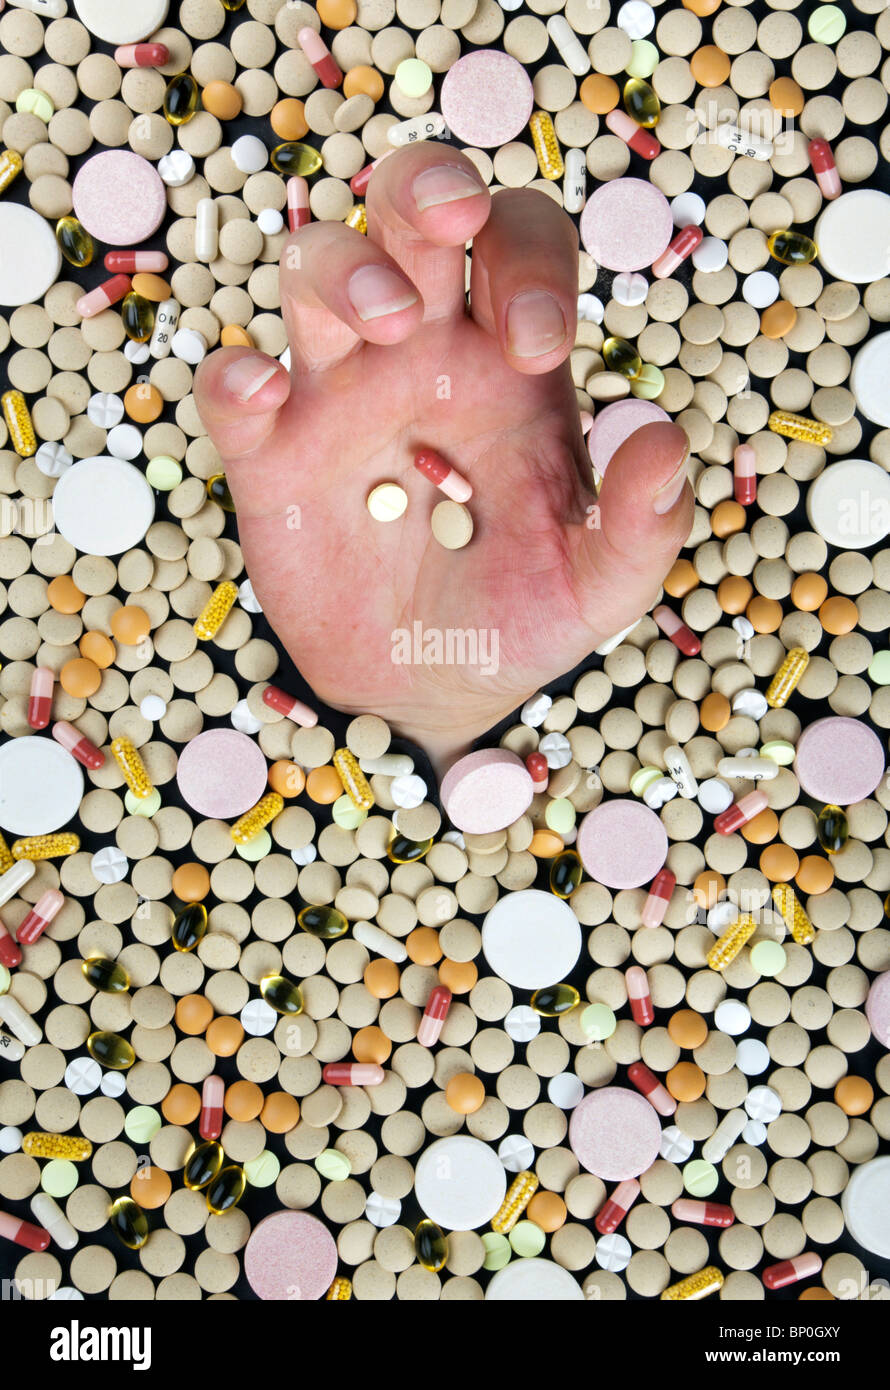 drowning in a sea of  medicine - hand reaching out between hundreds of pills Stock Photo